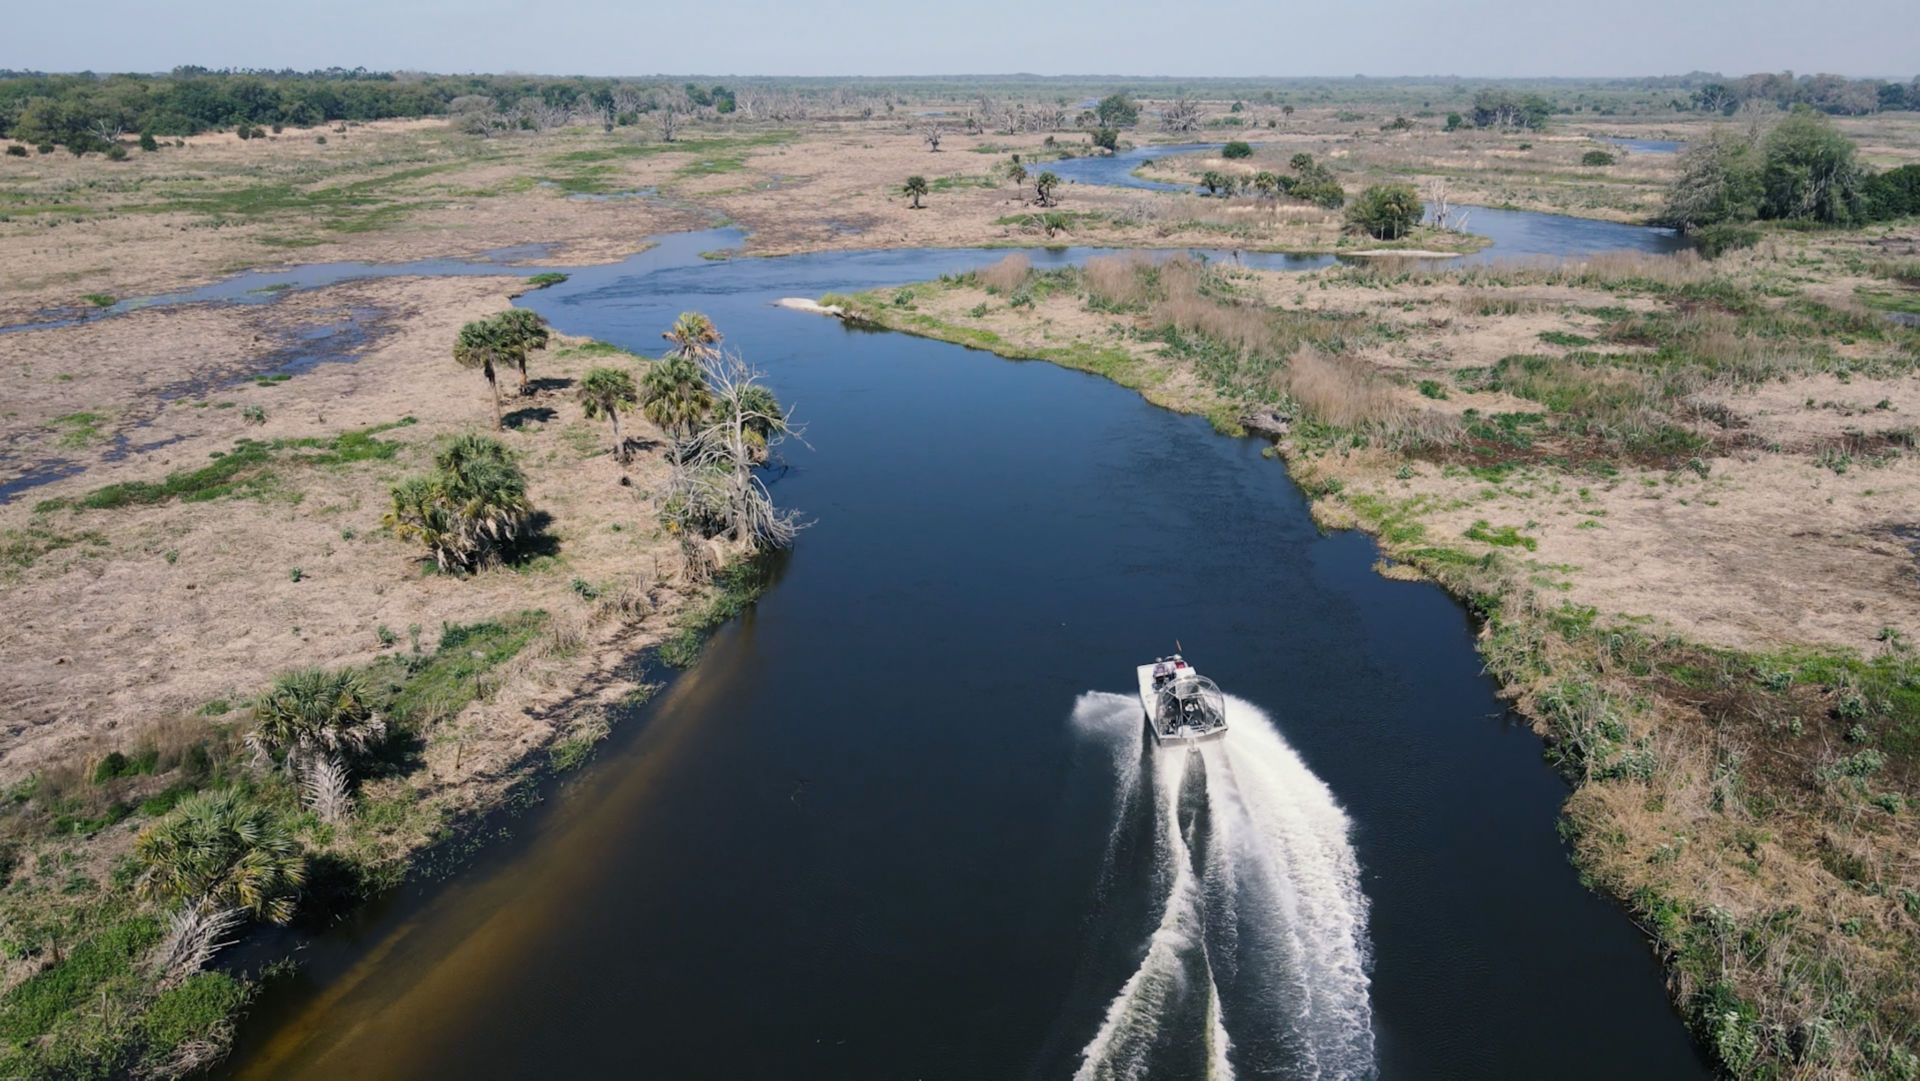 An airboat travels through the winding channels of the Kissimmee River